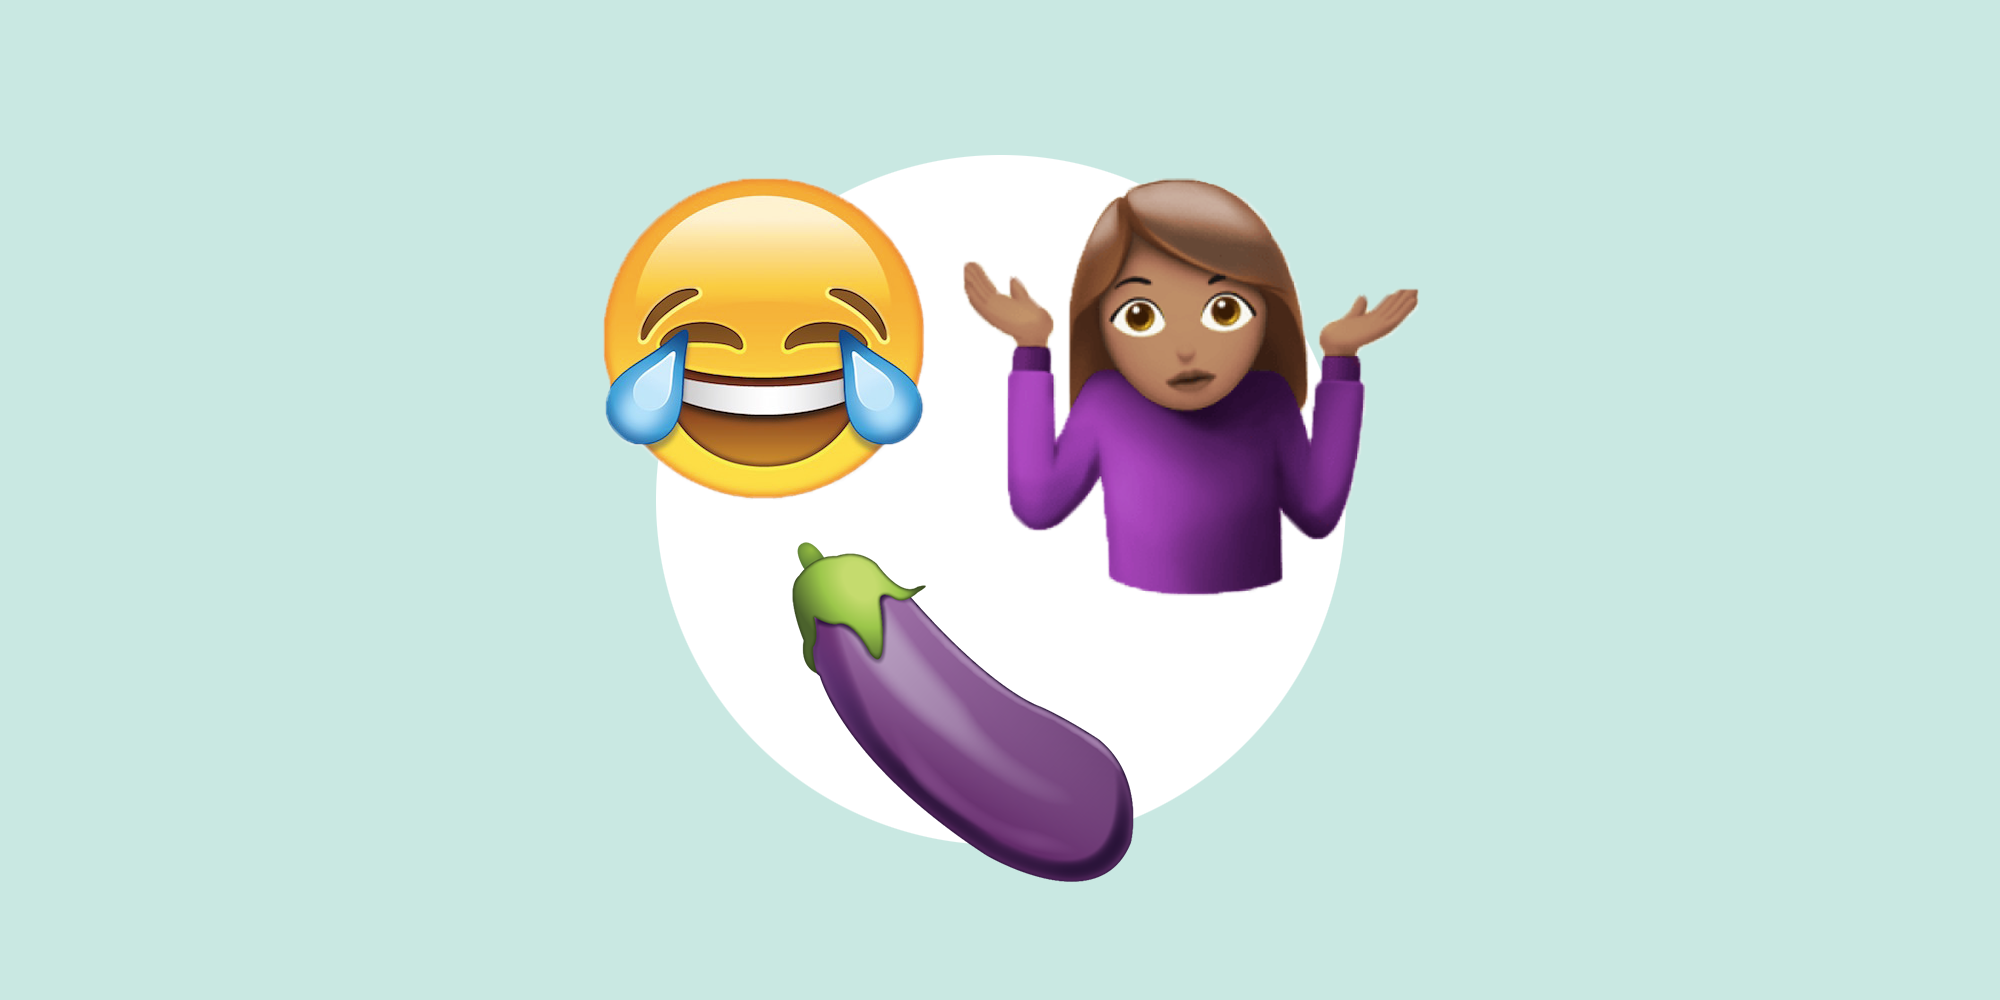 50 best emoji quiz questions for your next game night in image